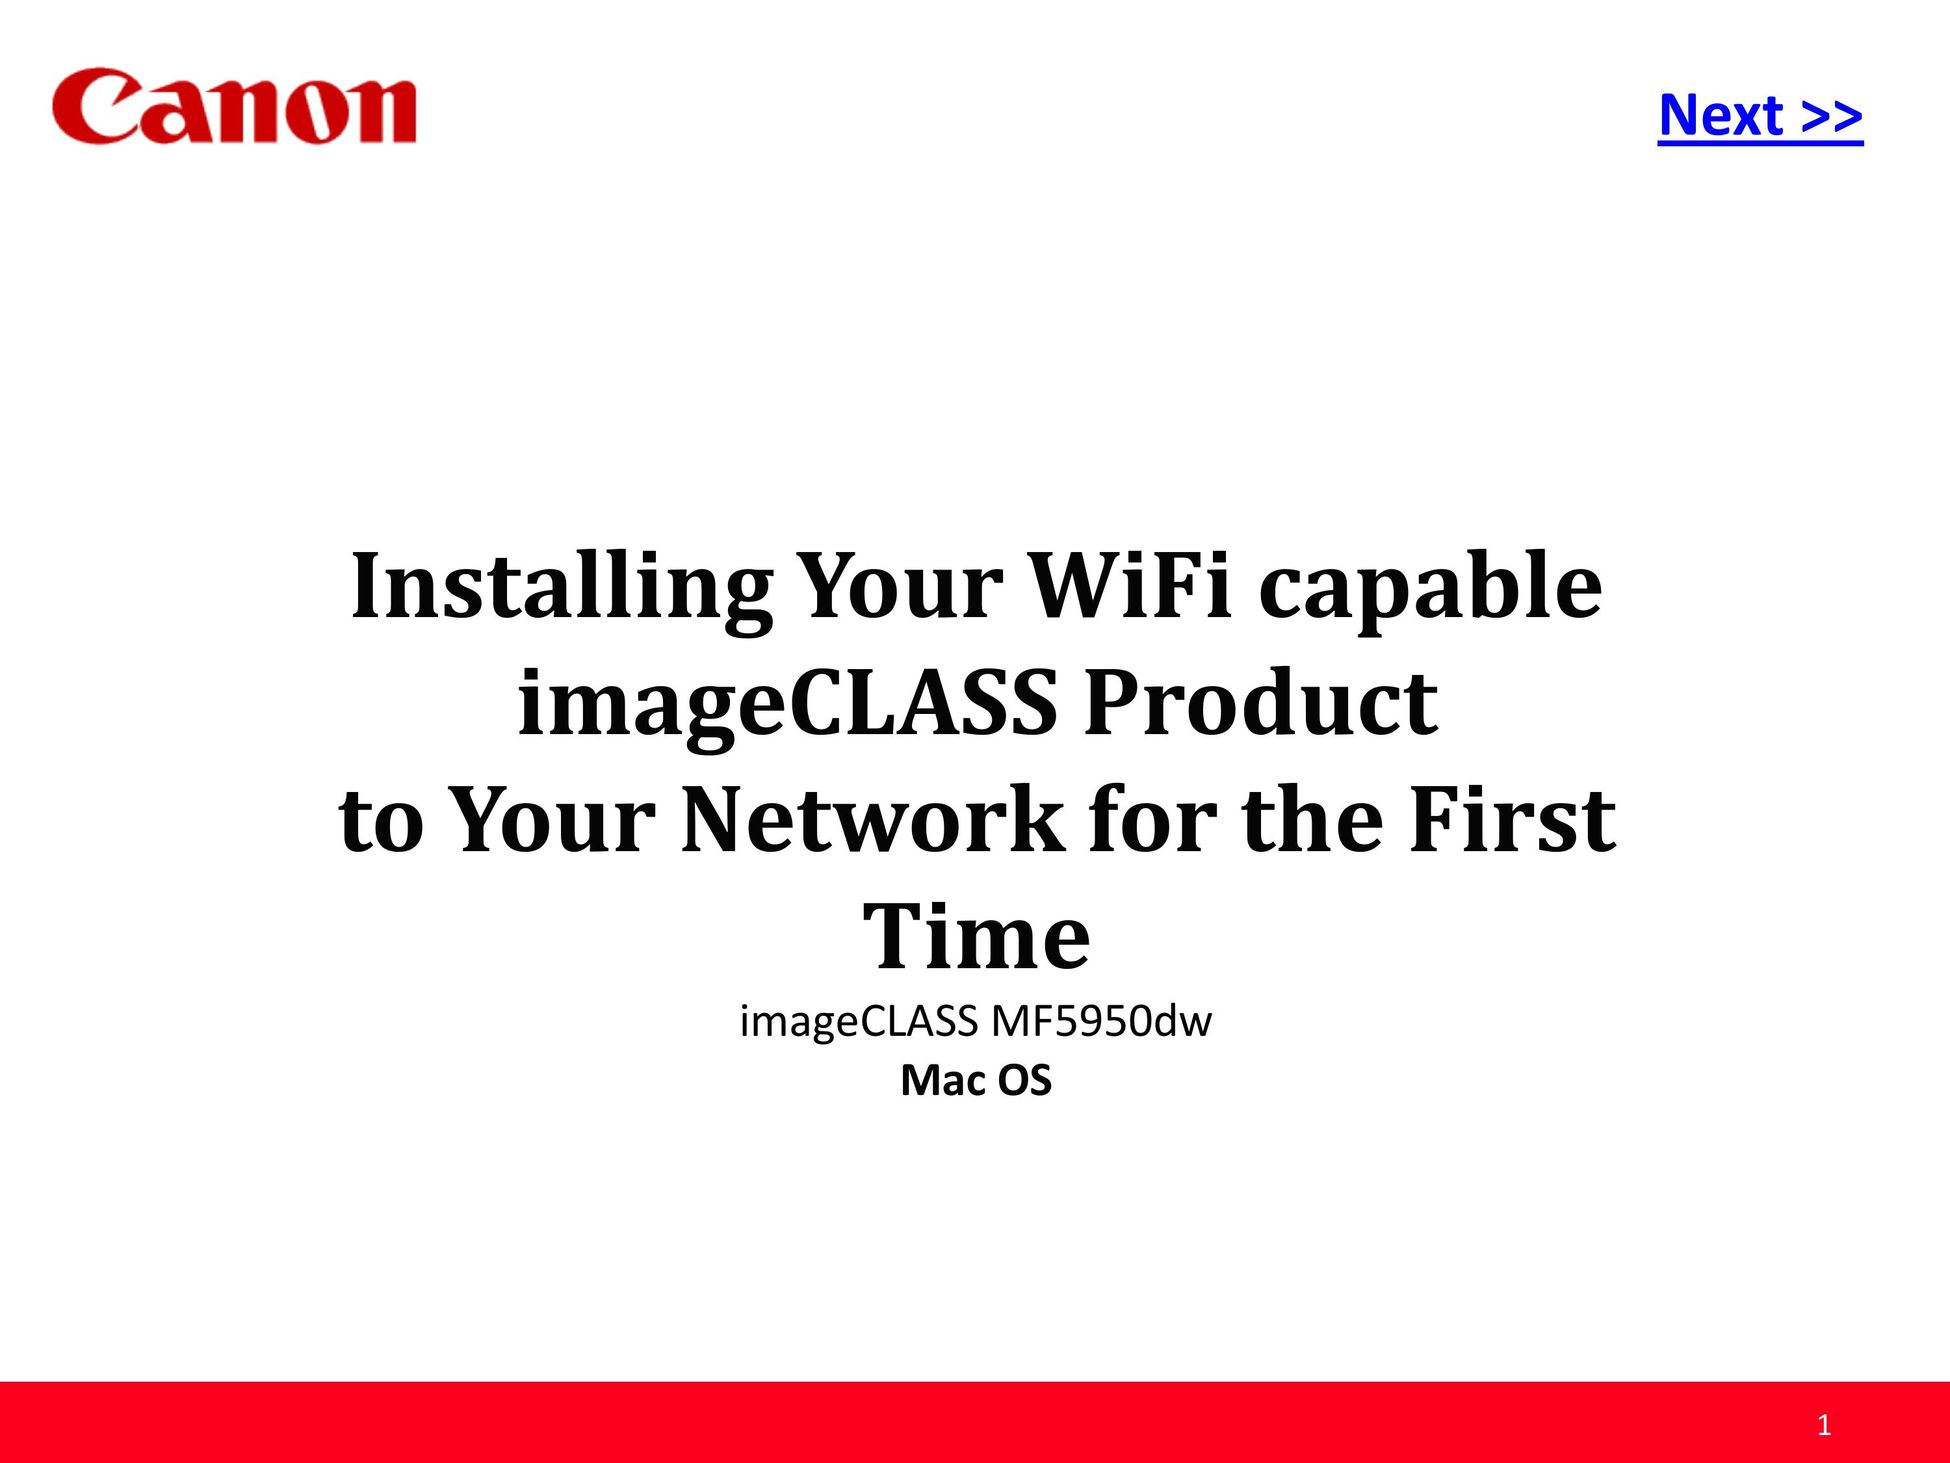 Canon MF5950dw Network Router User Manual